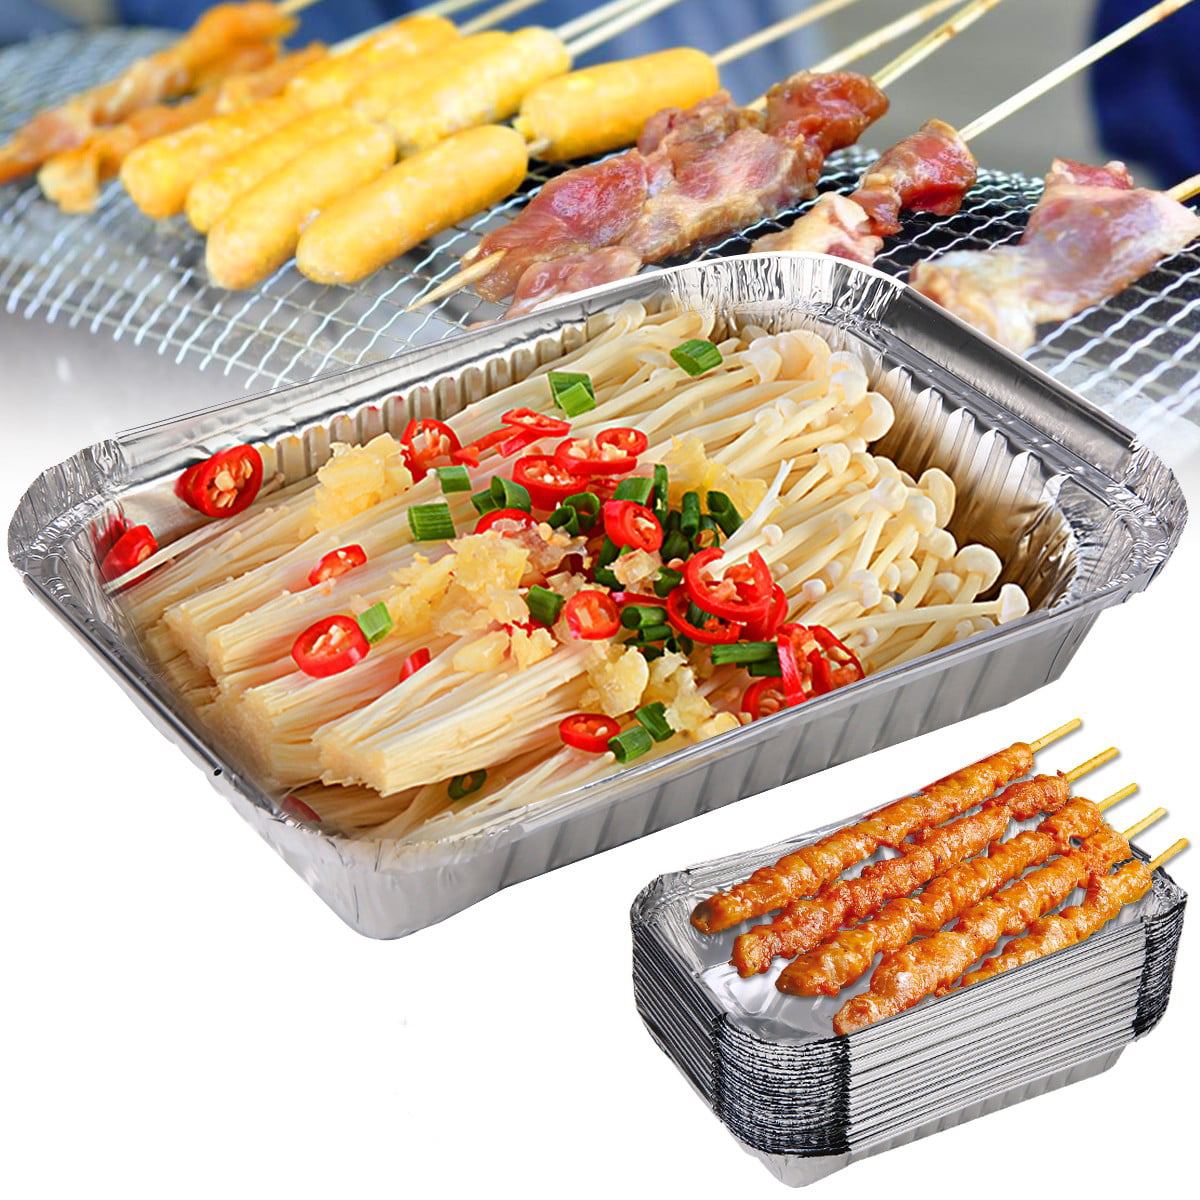 TRIANU 50Pack Aluminum Pans Disposable, 9x13“ Square Baking Pans for  Prepping, Roasting, Food, Storing, Heating, Cooking, Chafers, Catering,  Crawfish